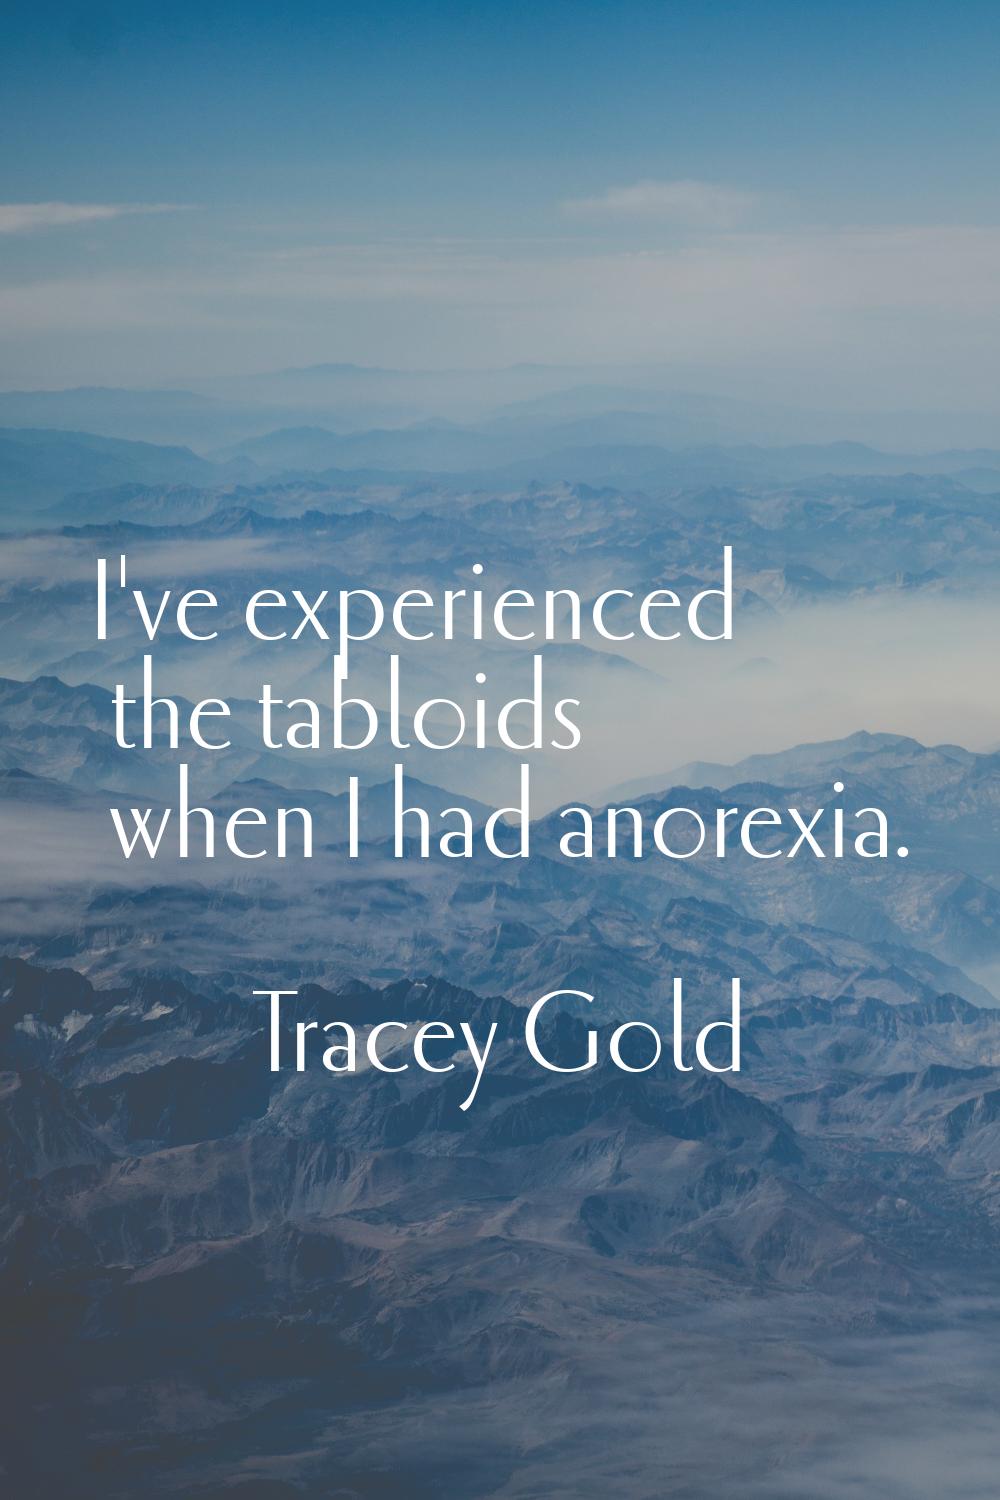 I've experienced the tabloids when I had anorexia.